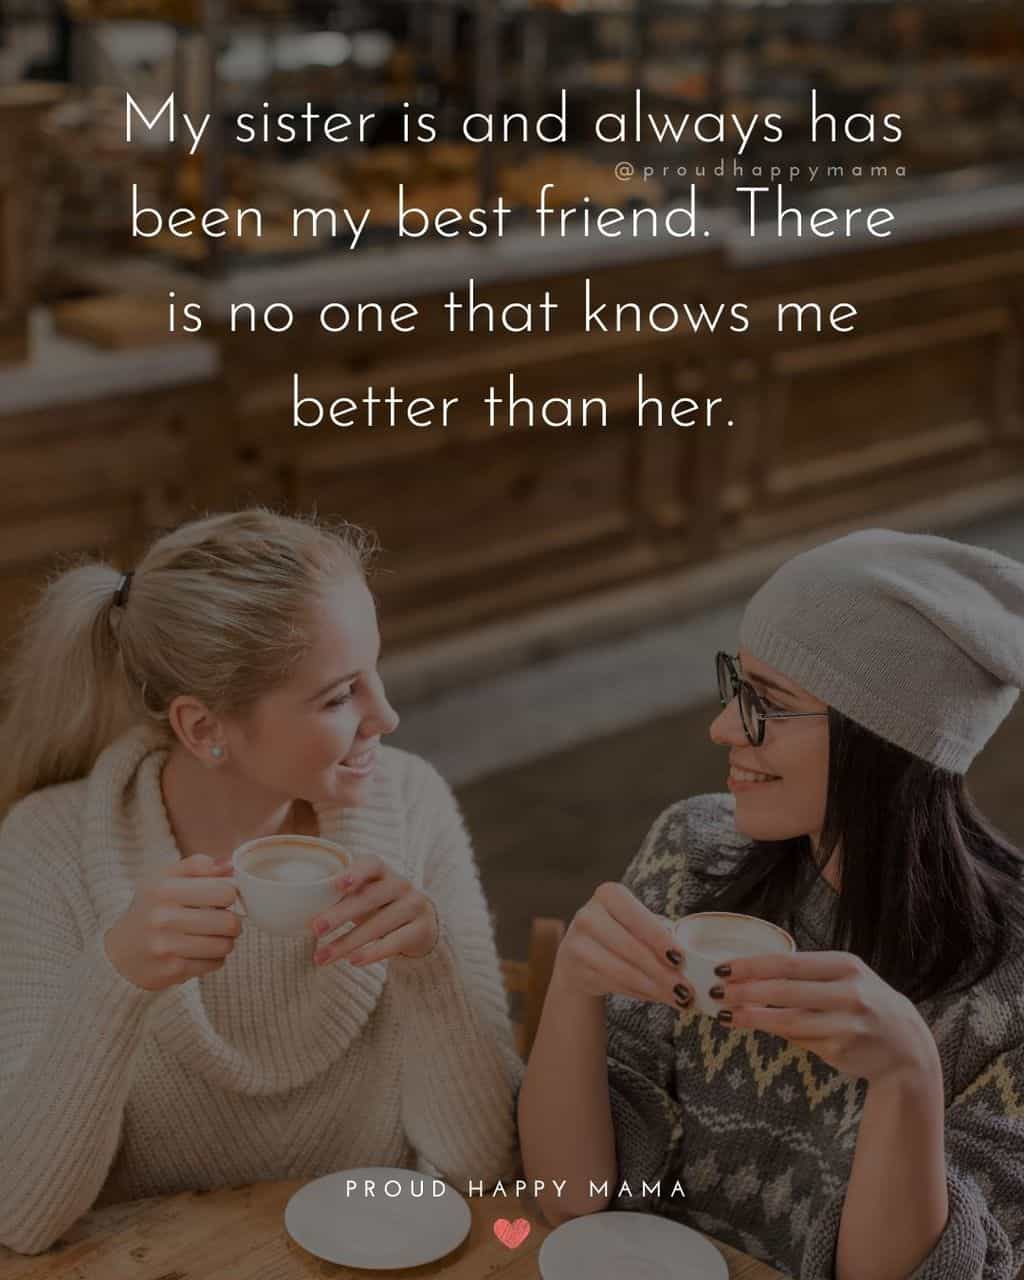 Meaningful Sister Quotes - My sister is and always has been my best friend. There is no one that knows me better than her.